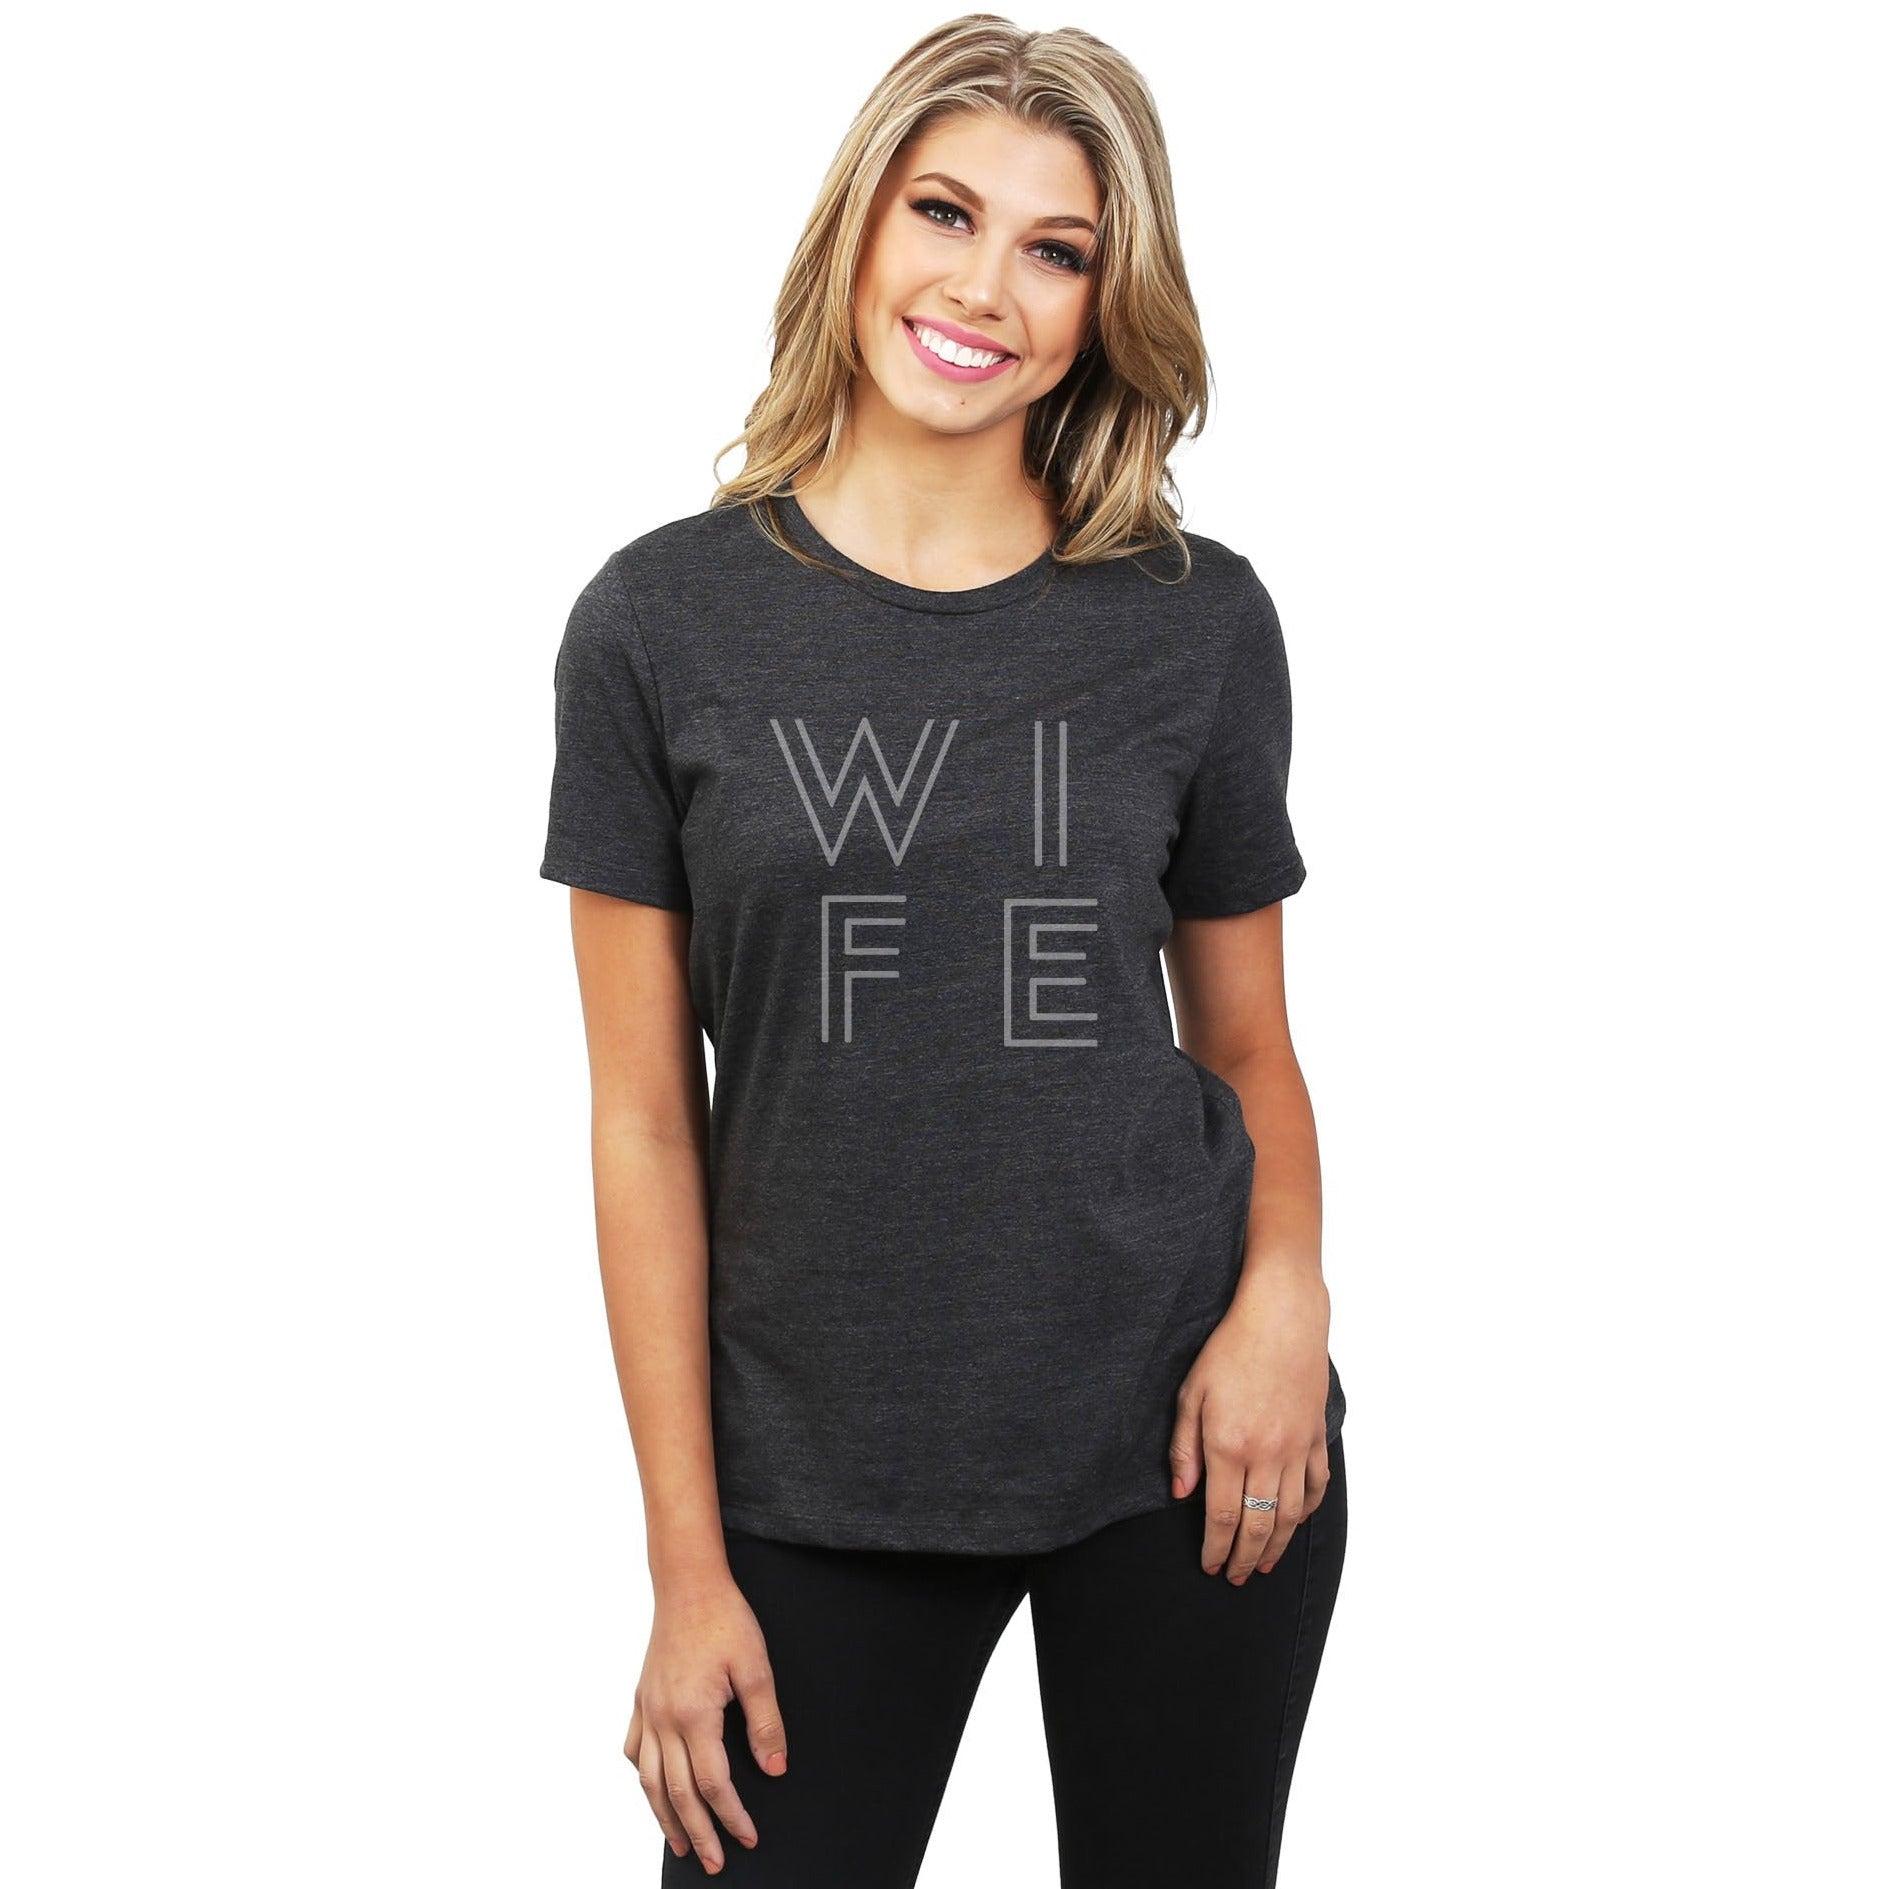 Wife Women's Relaxed Crewneck T-Shirt Top Tee Charcoal Grey Model
